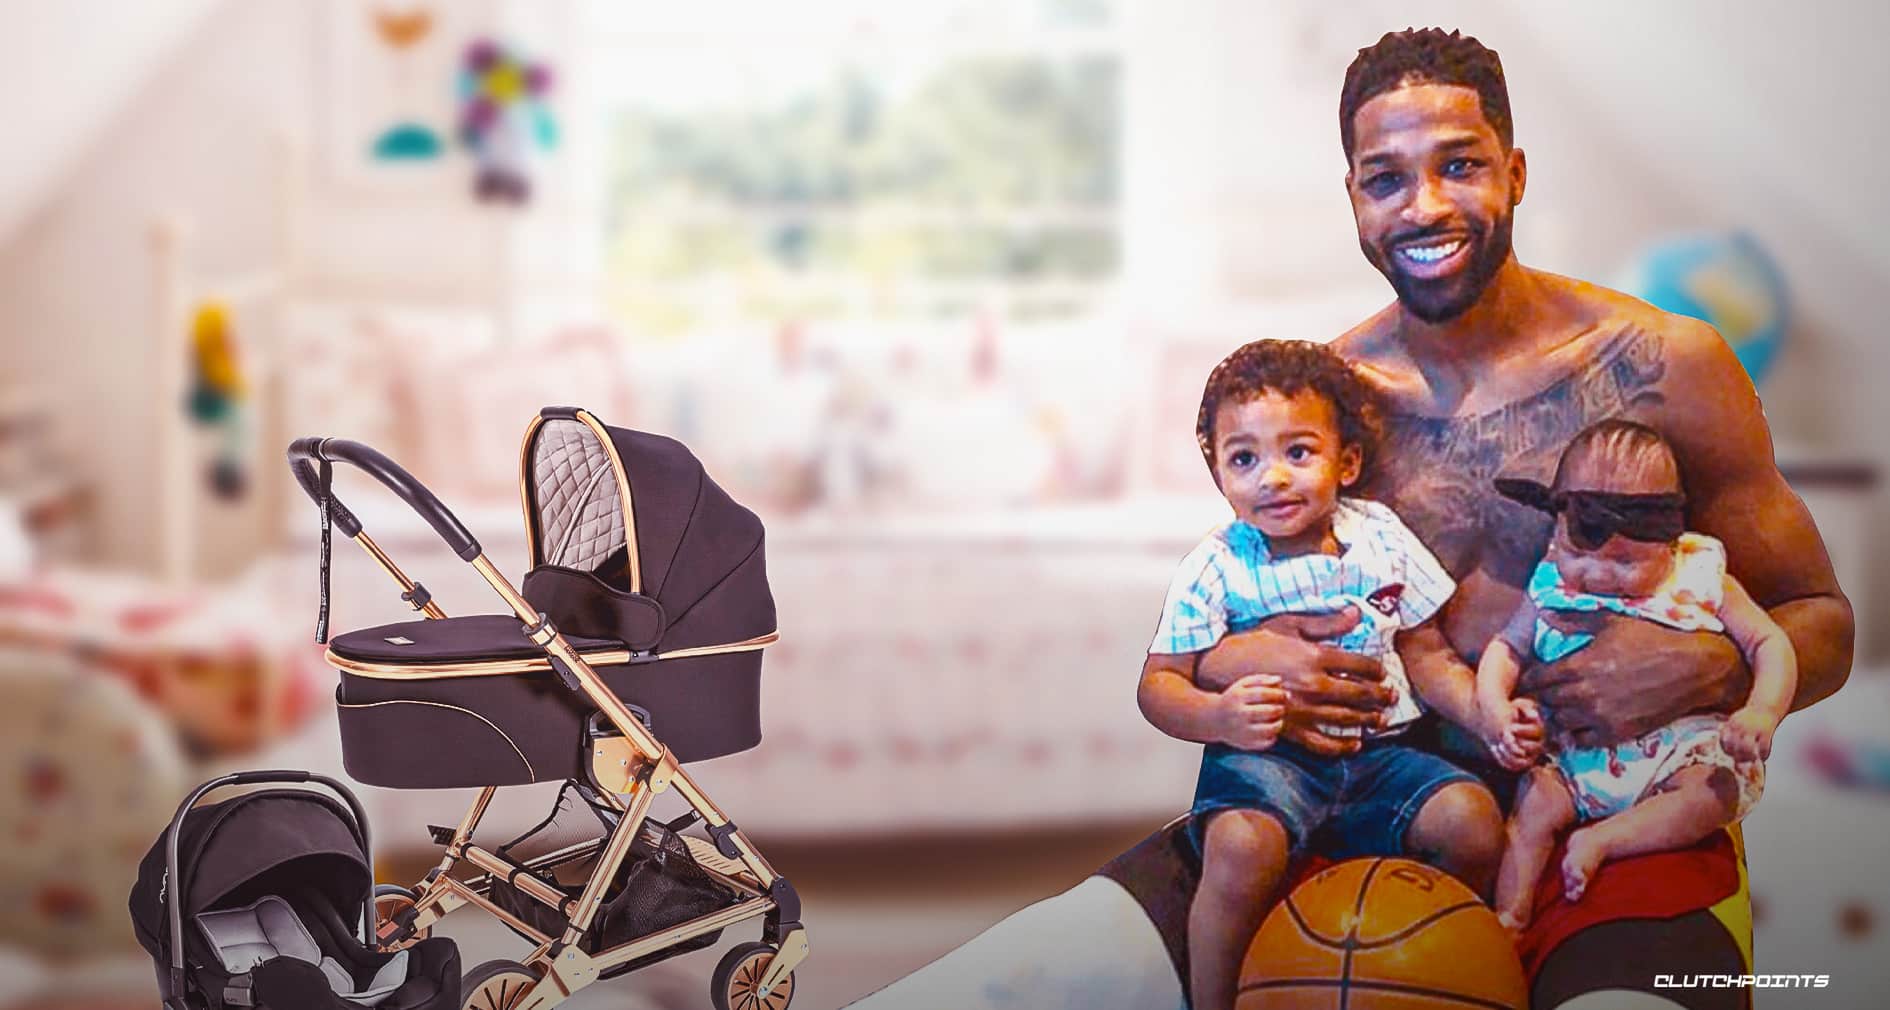 tristan-thompson-is-in-trouble-woman-alleges-she-is-carrying-his-child-learn-more-details